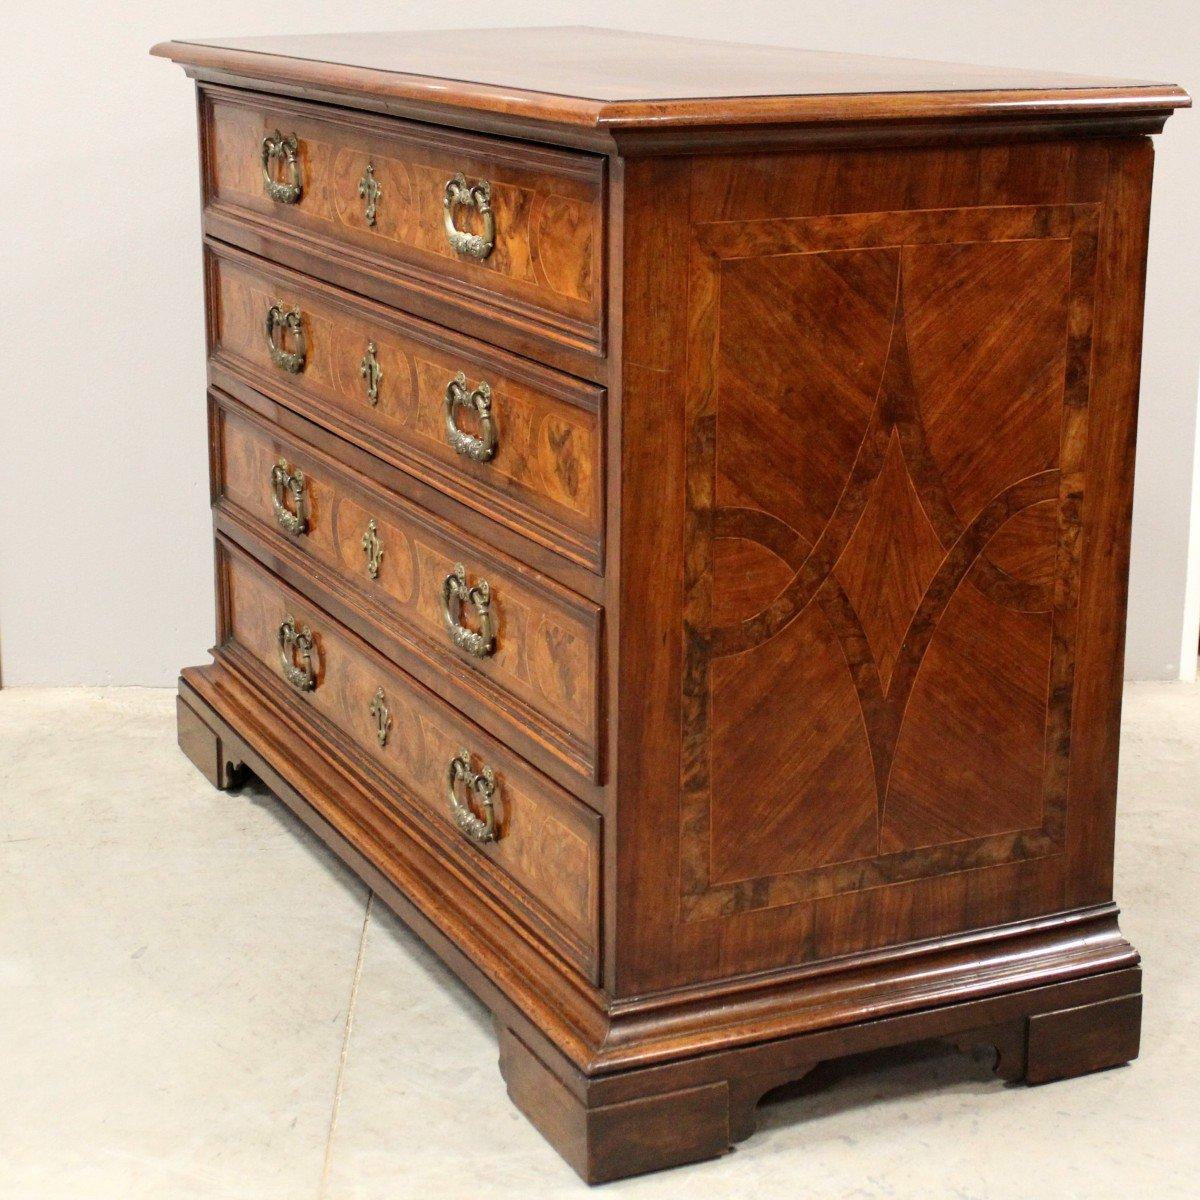 18th Century Italian Walnut Commode with Four Drawers and Ornate Hardware For Sale 1